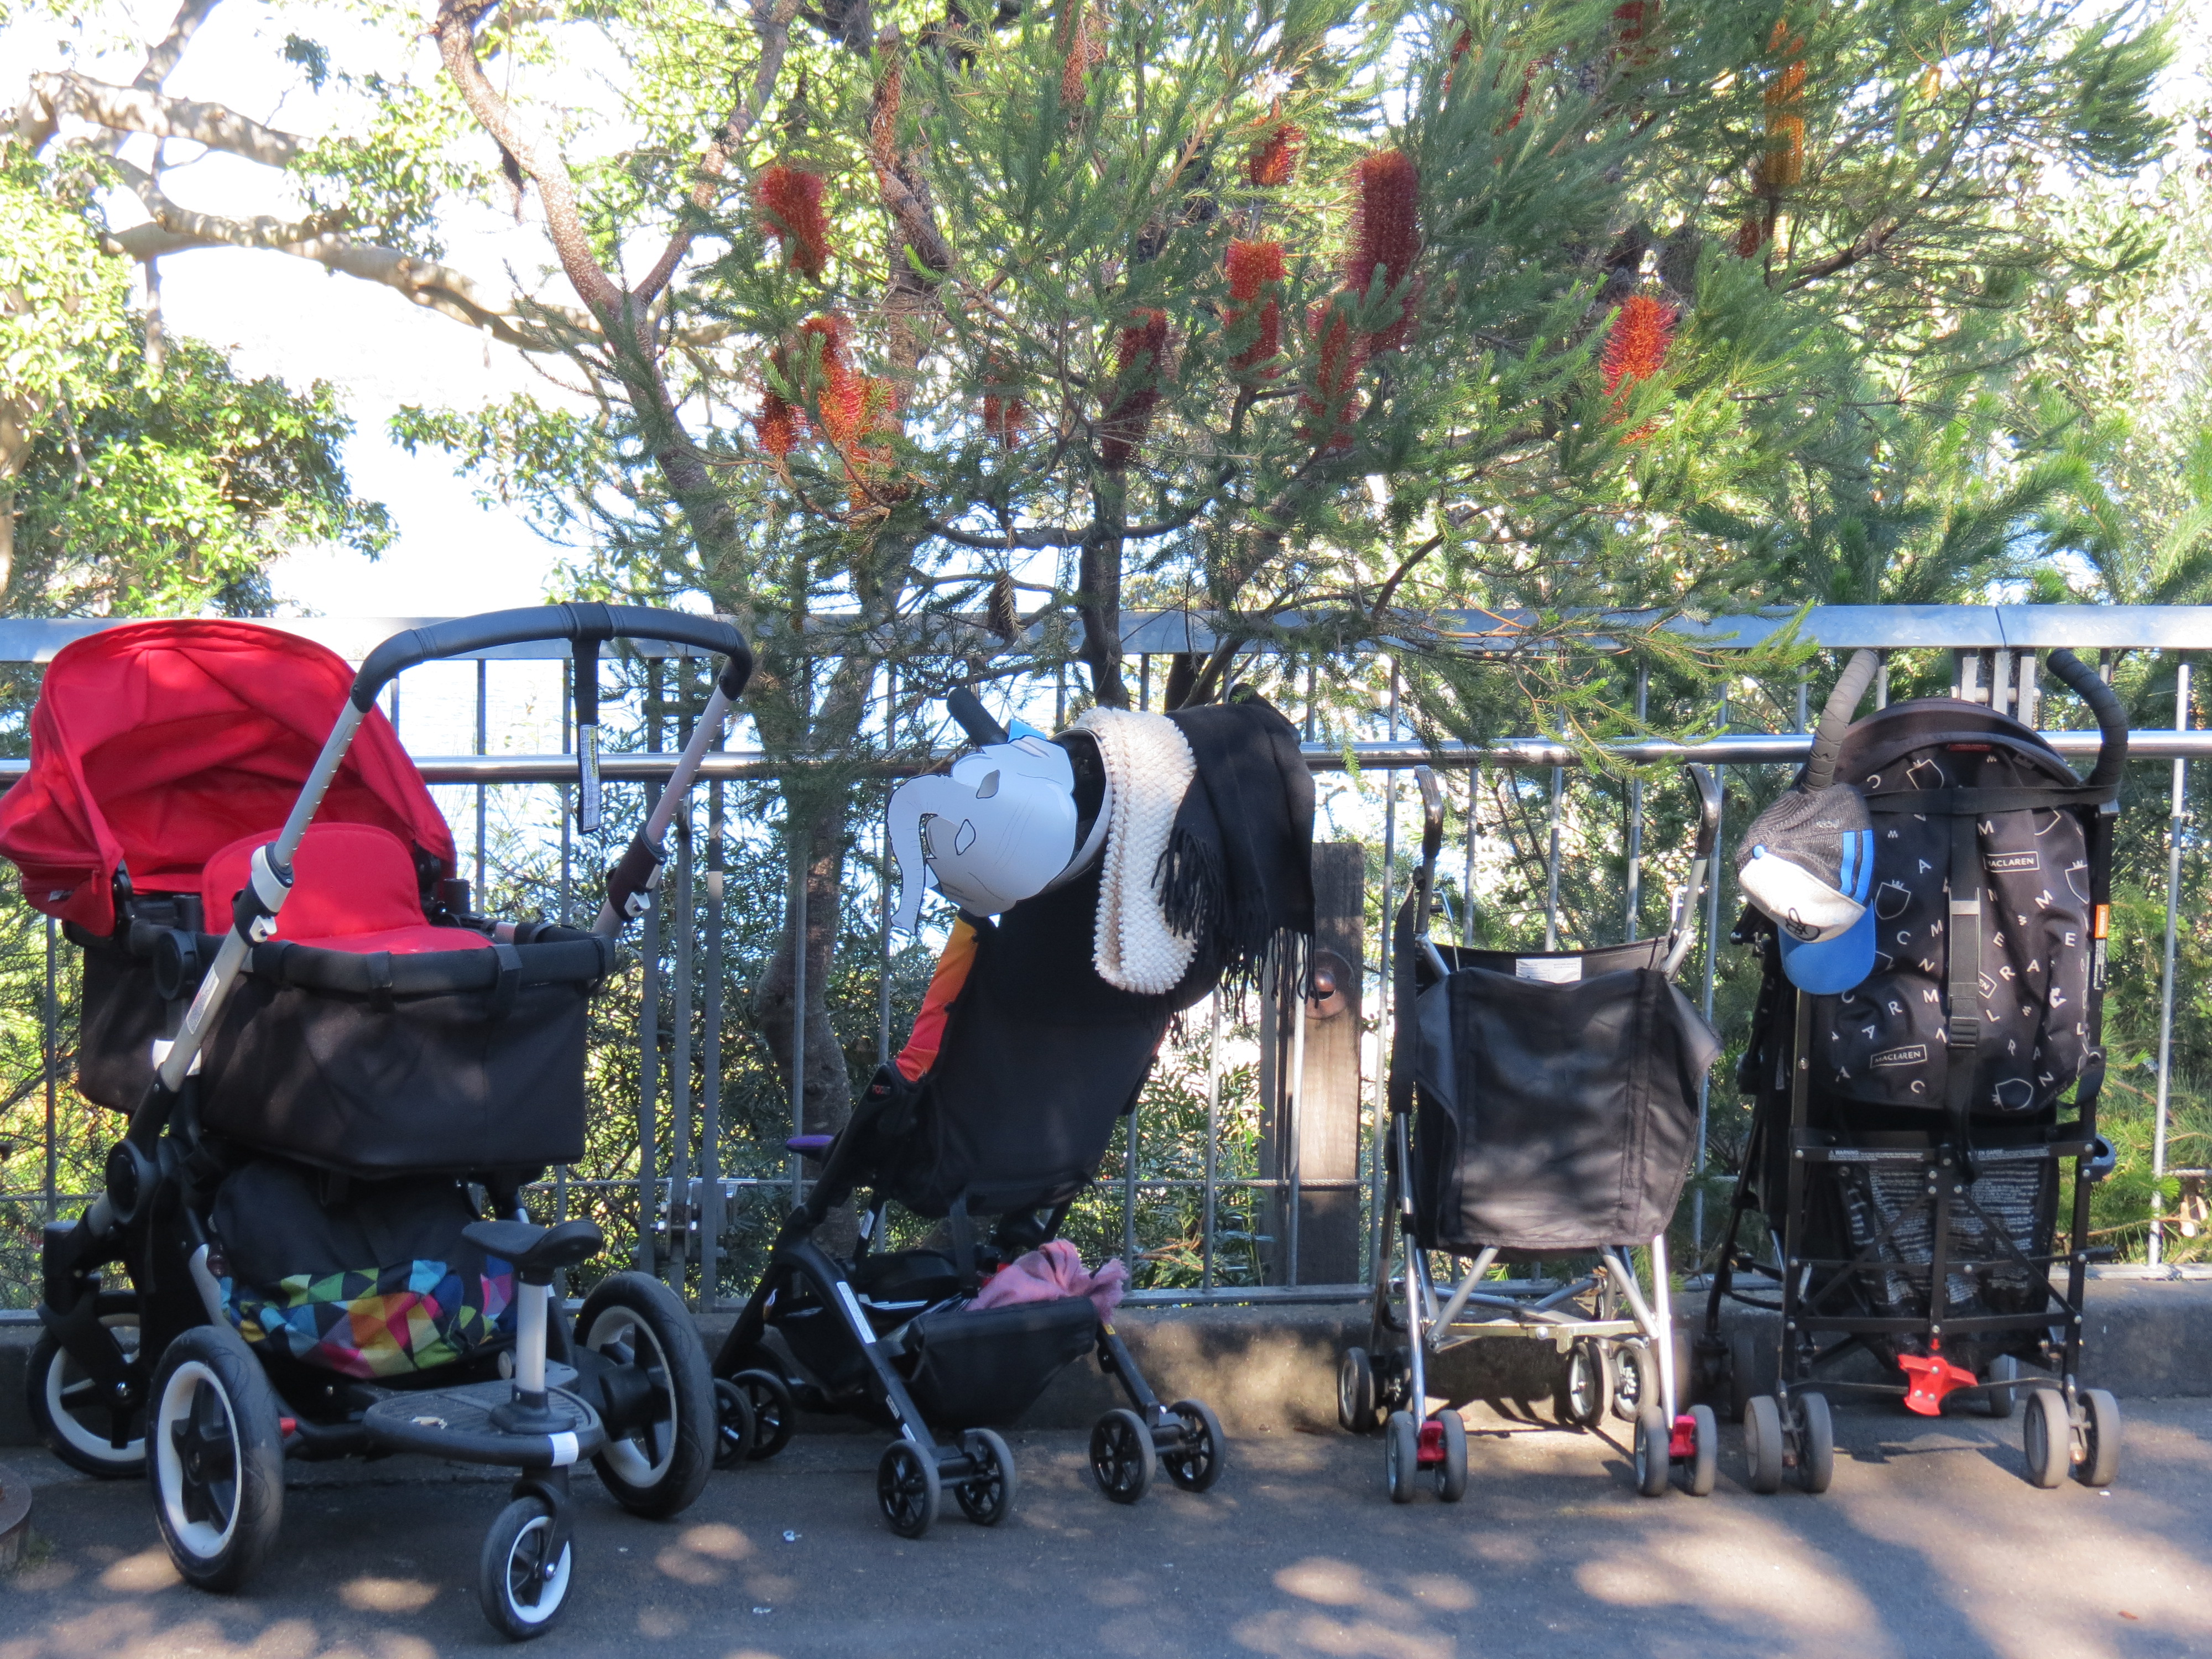 image of 4 buggy stroller at the zoo stroller parking area